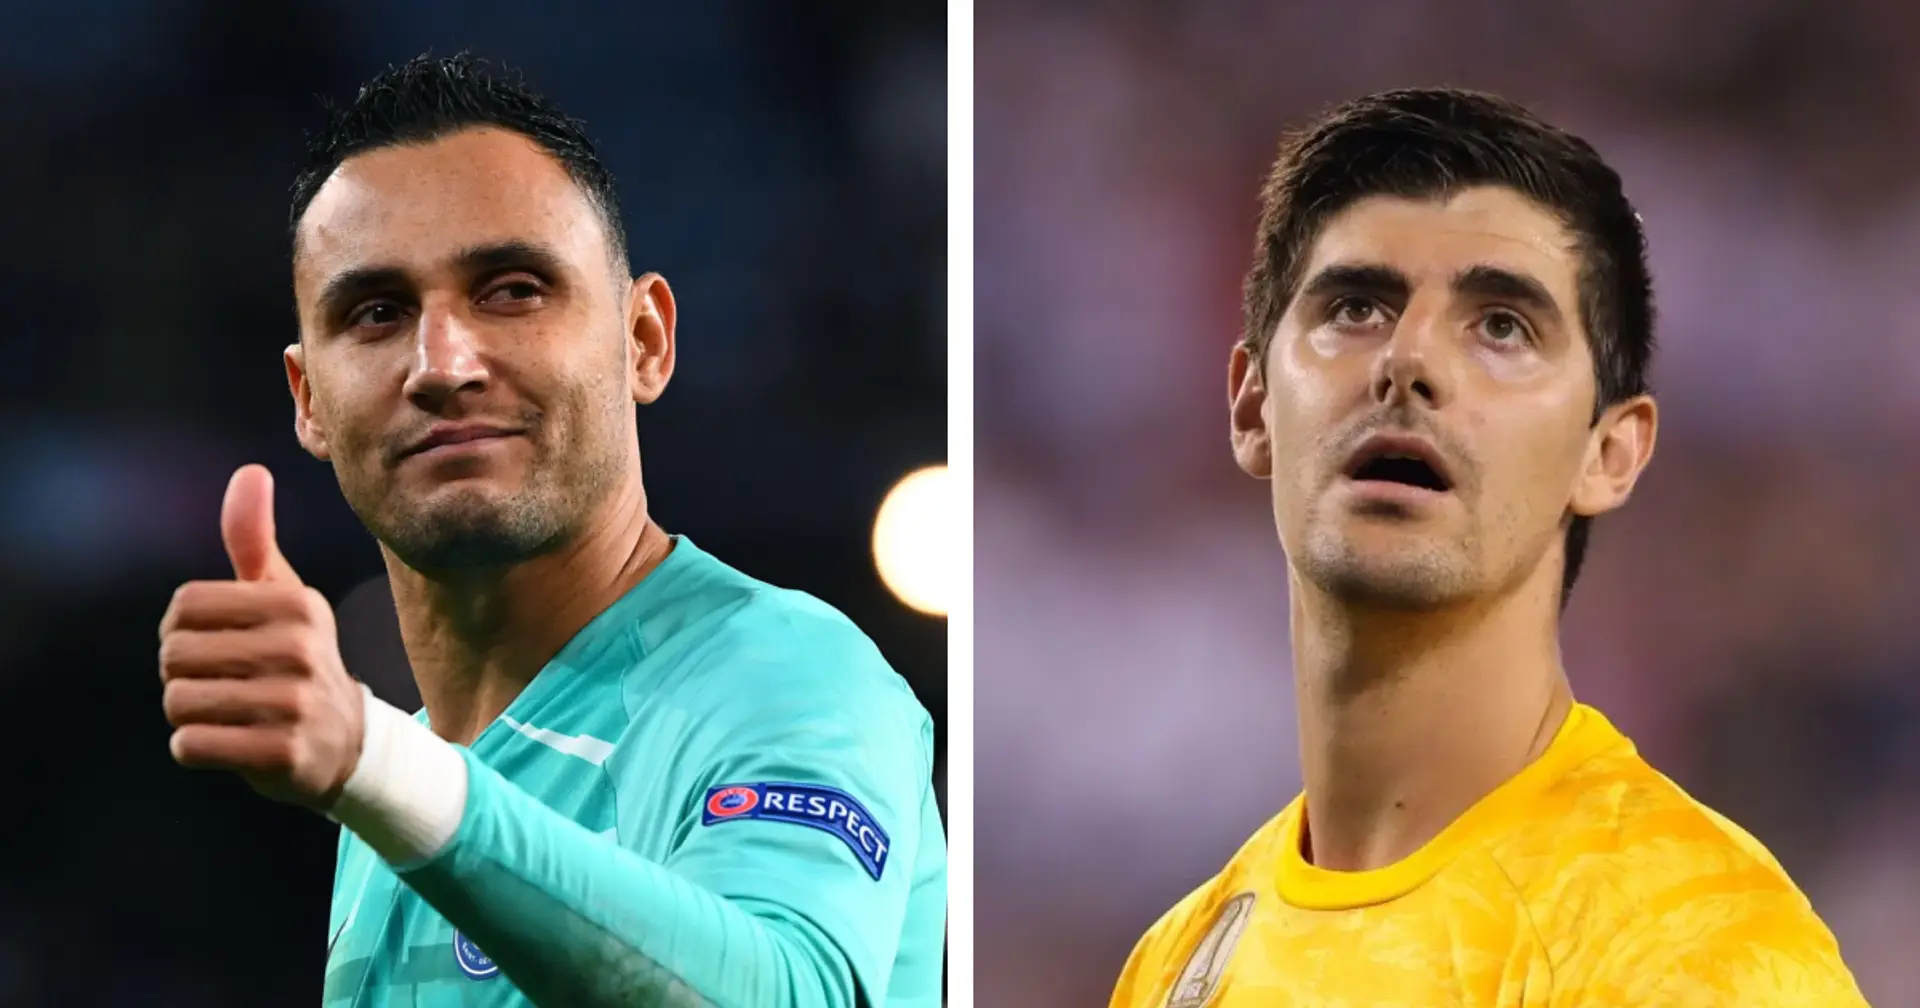 World's top 10 goalkeepers revealed - Thibaut Courtois and  Keylor Navas in